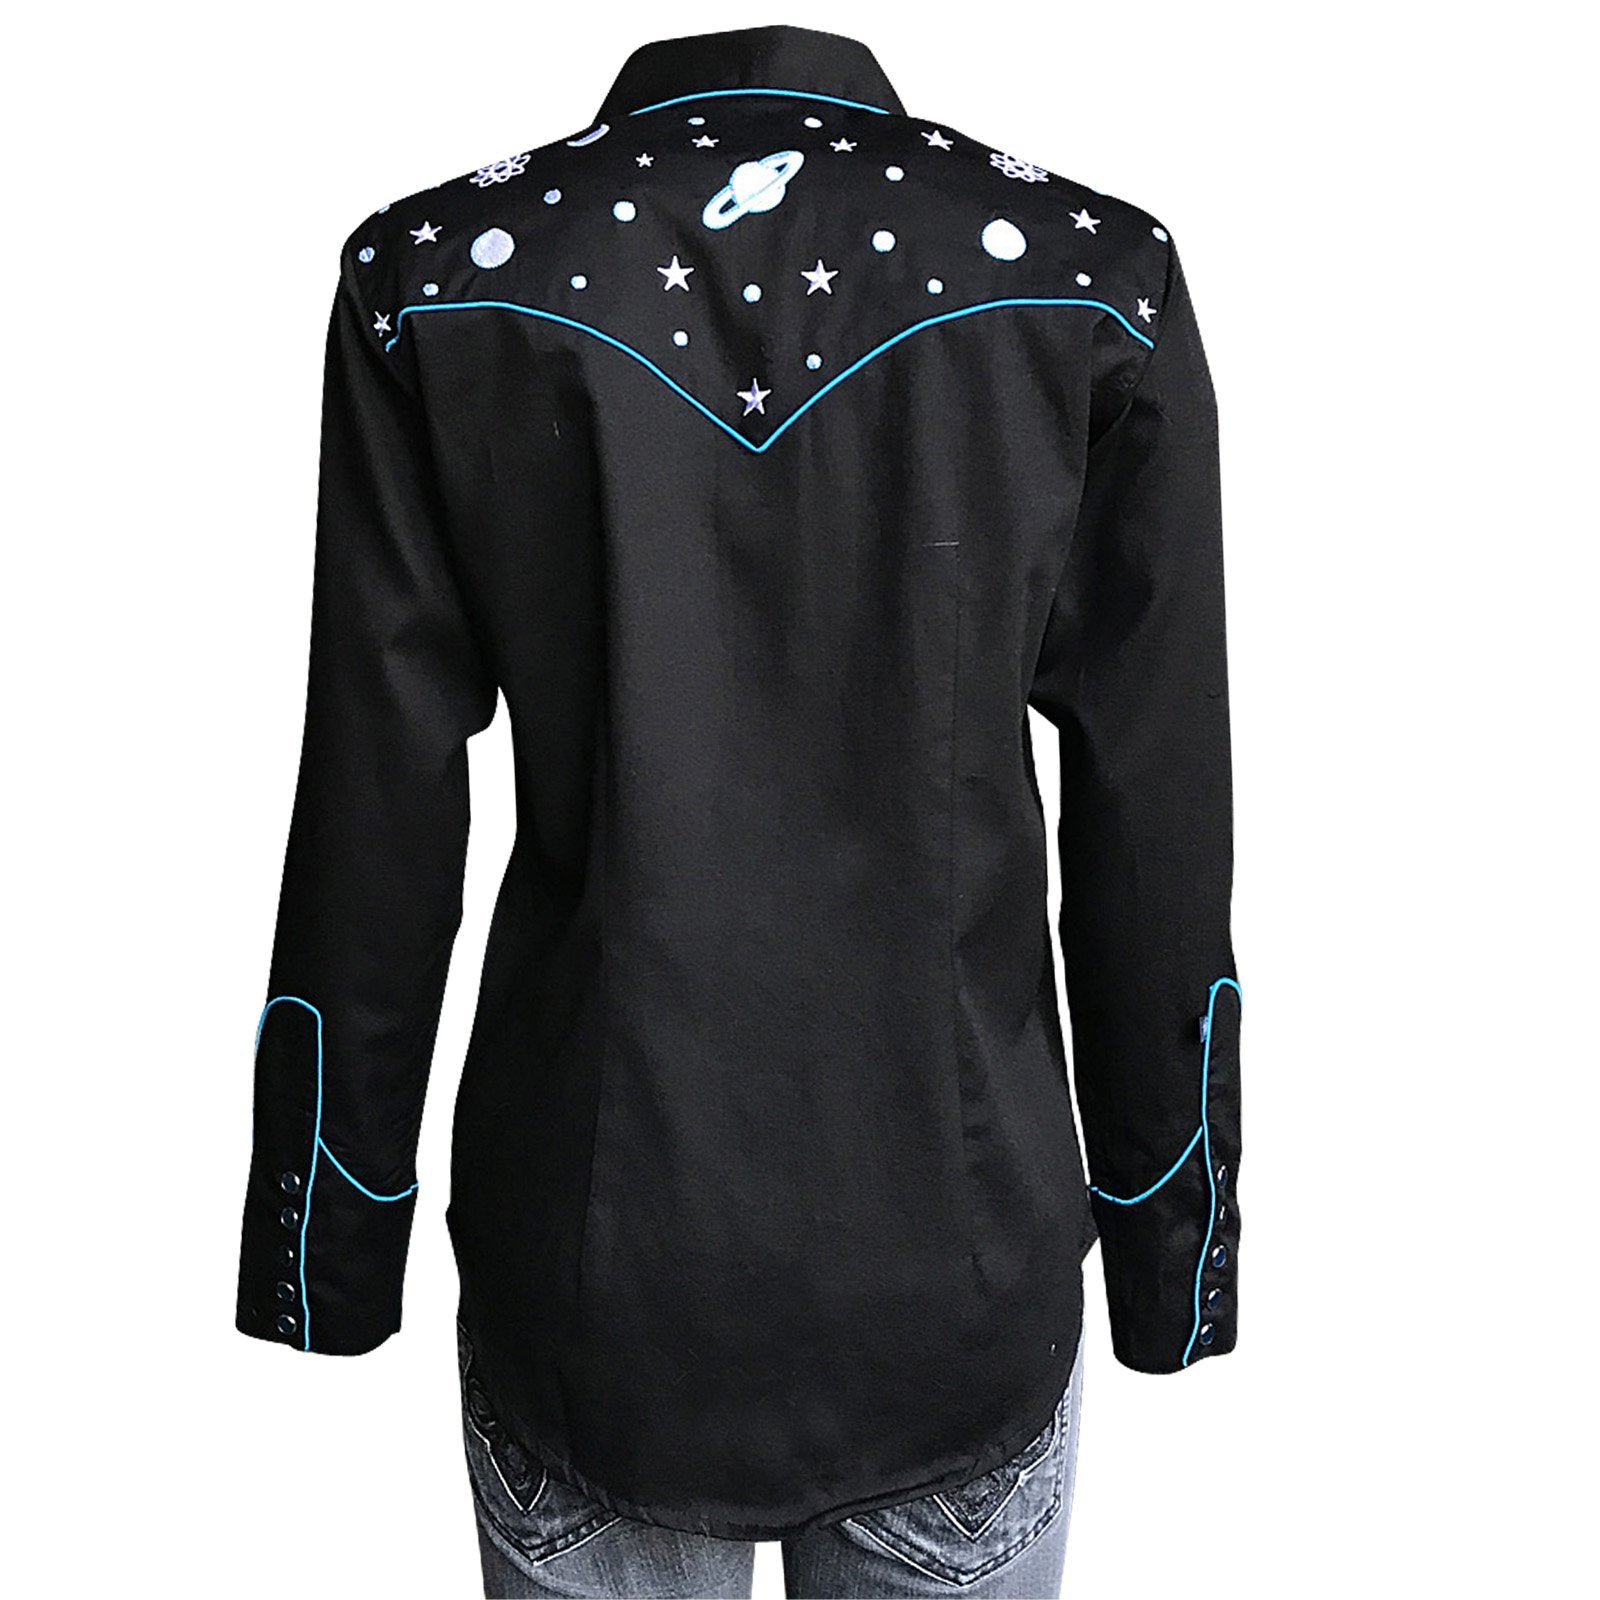 Rockmount Ranch Wear Ladies' Vintage Inspired Western Shirt with Embroidered Planets Back